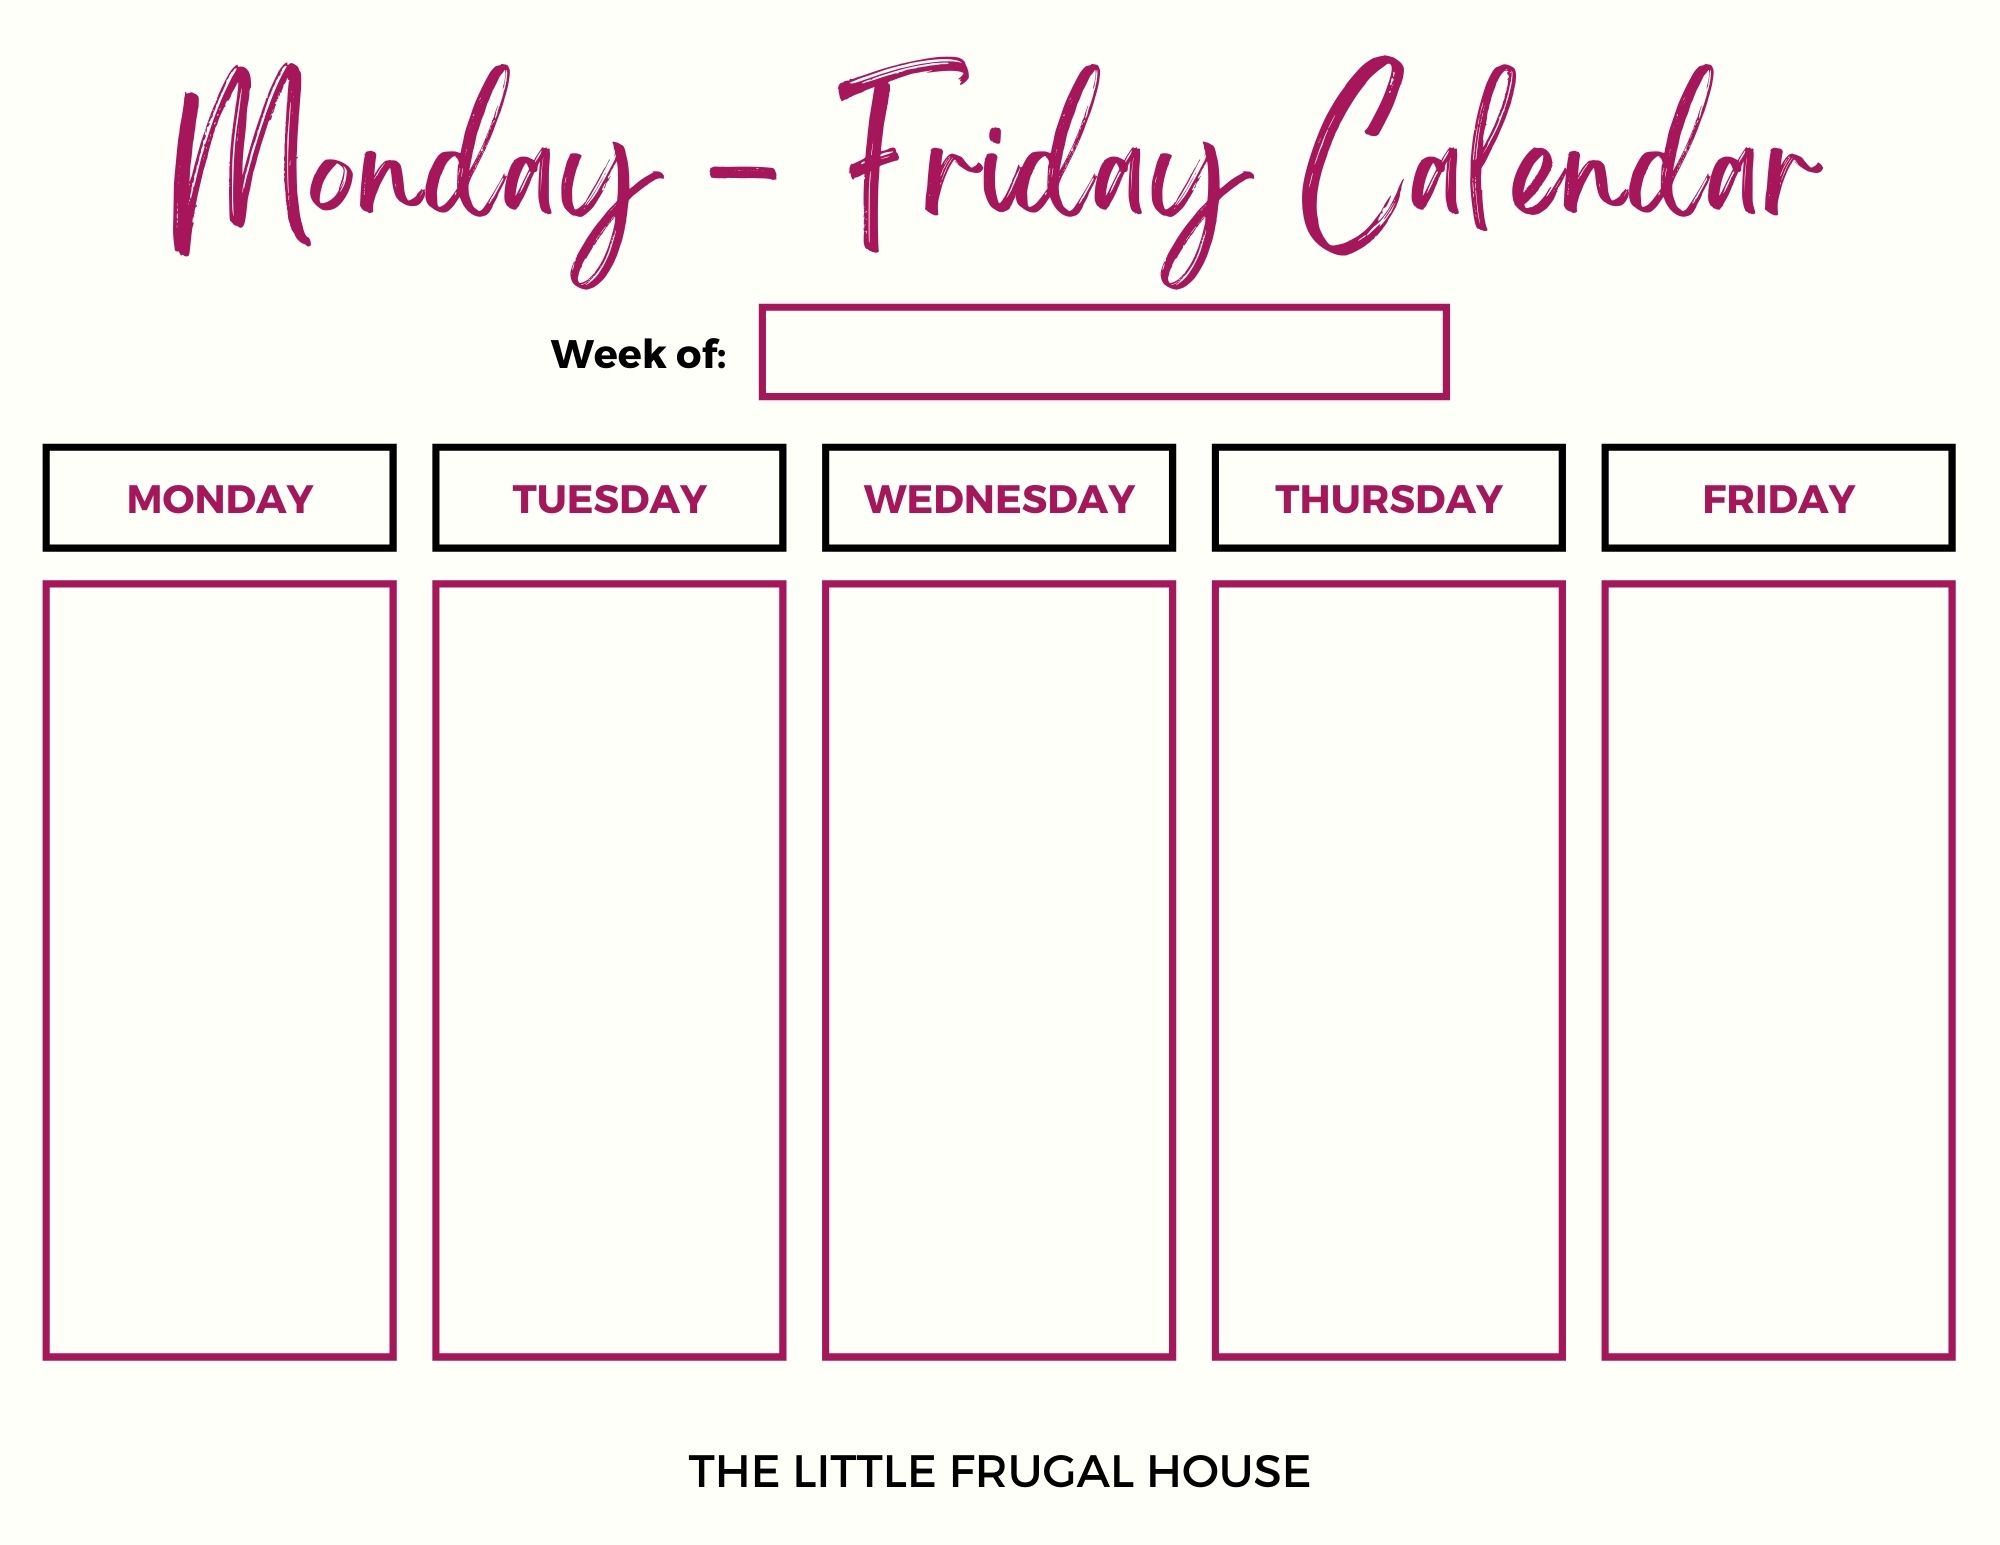 Free Printable Calendar Monday Through Friday 4 Weekly Color Options 3209